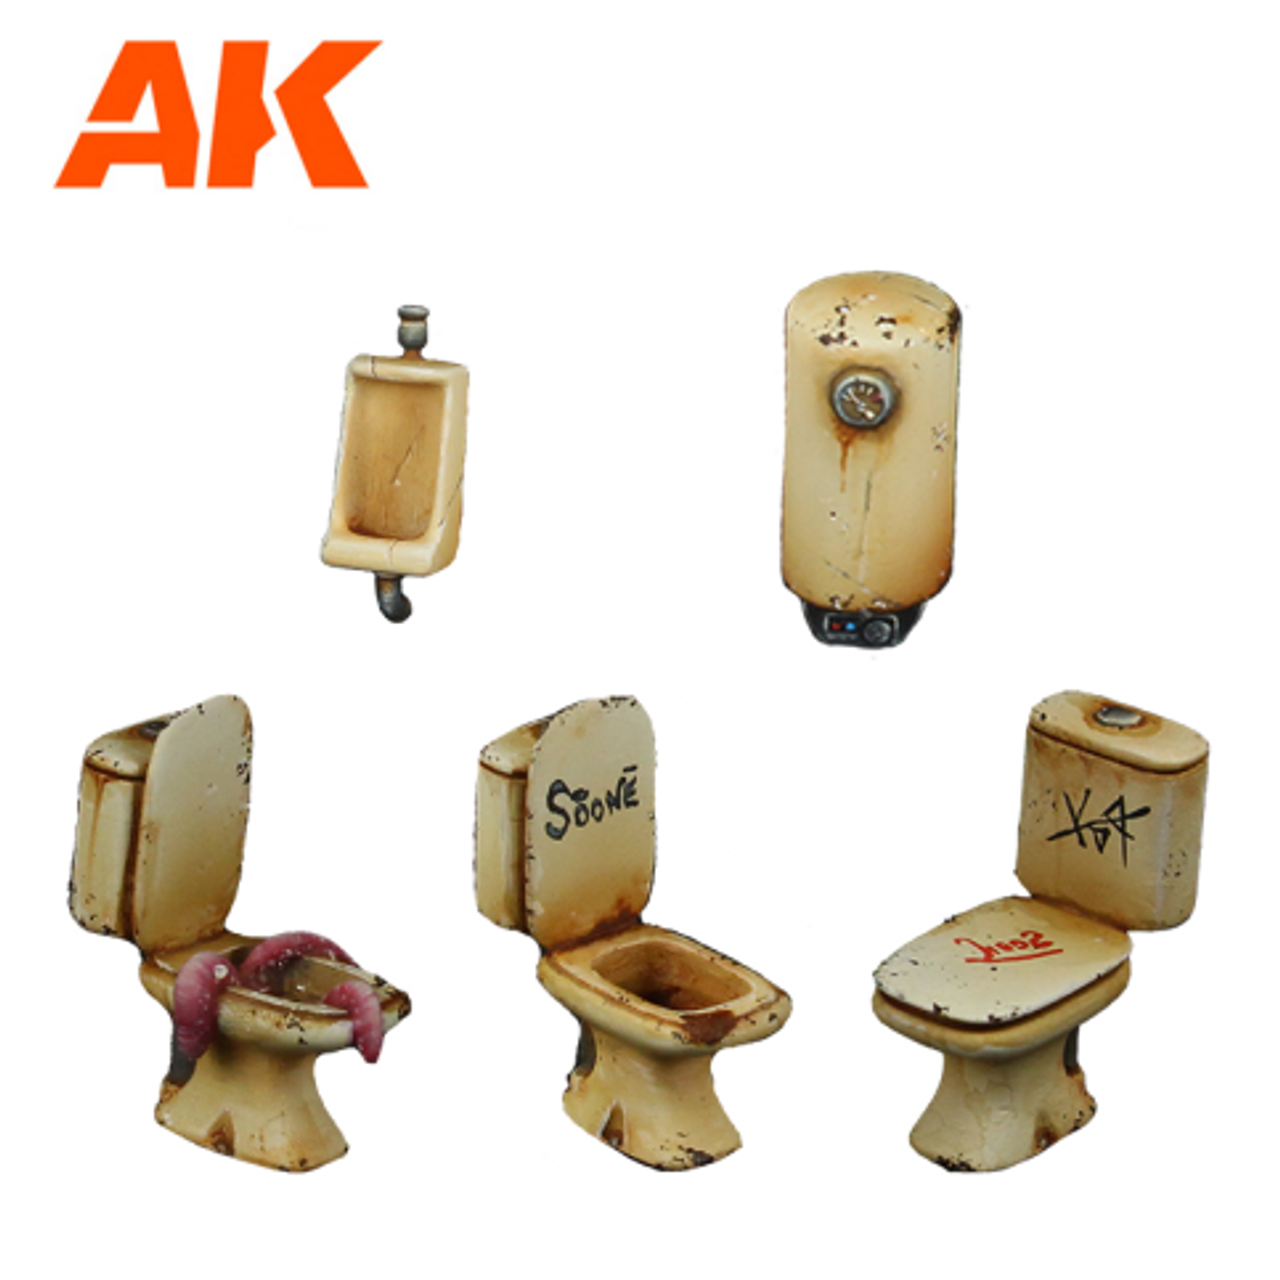 Bathroom Furniture (Poly-resin, 30-35mm scale)